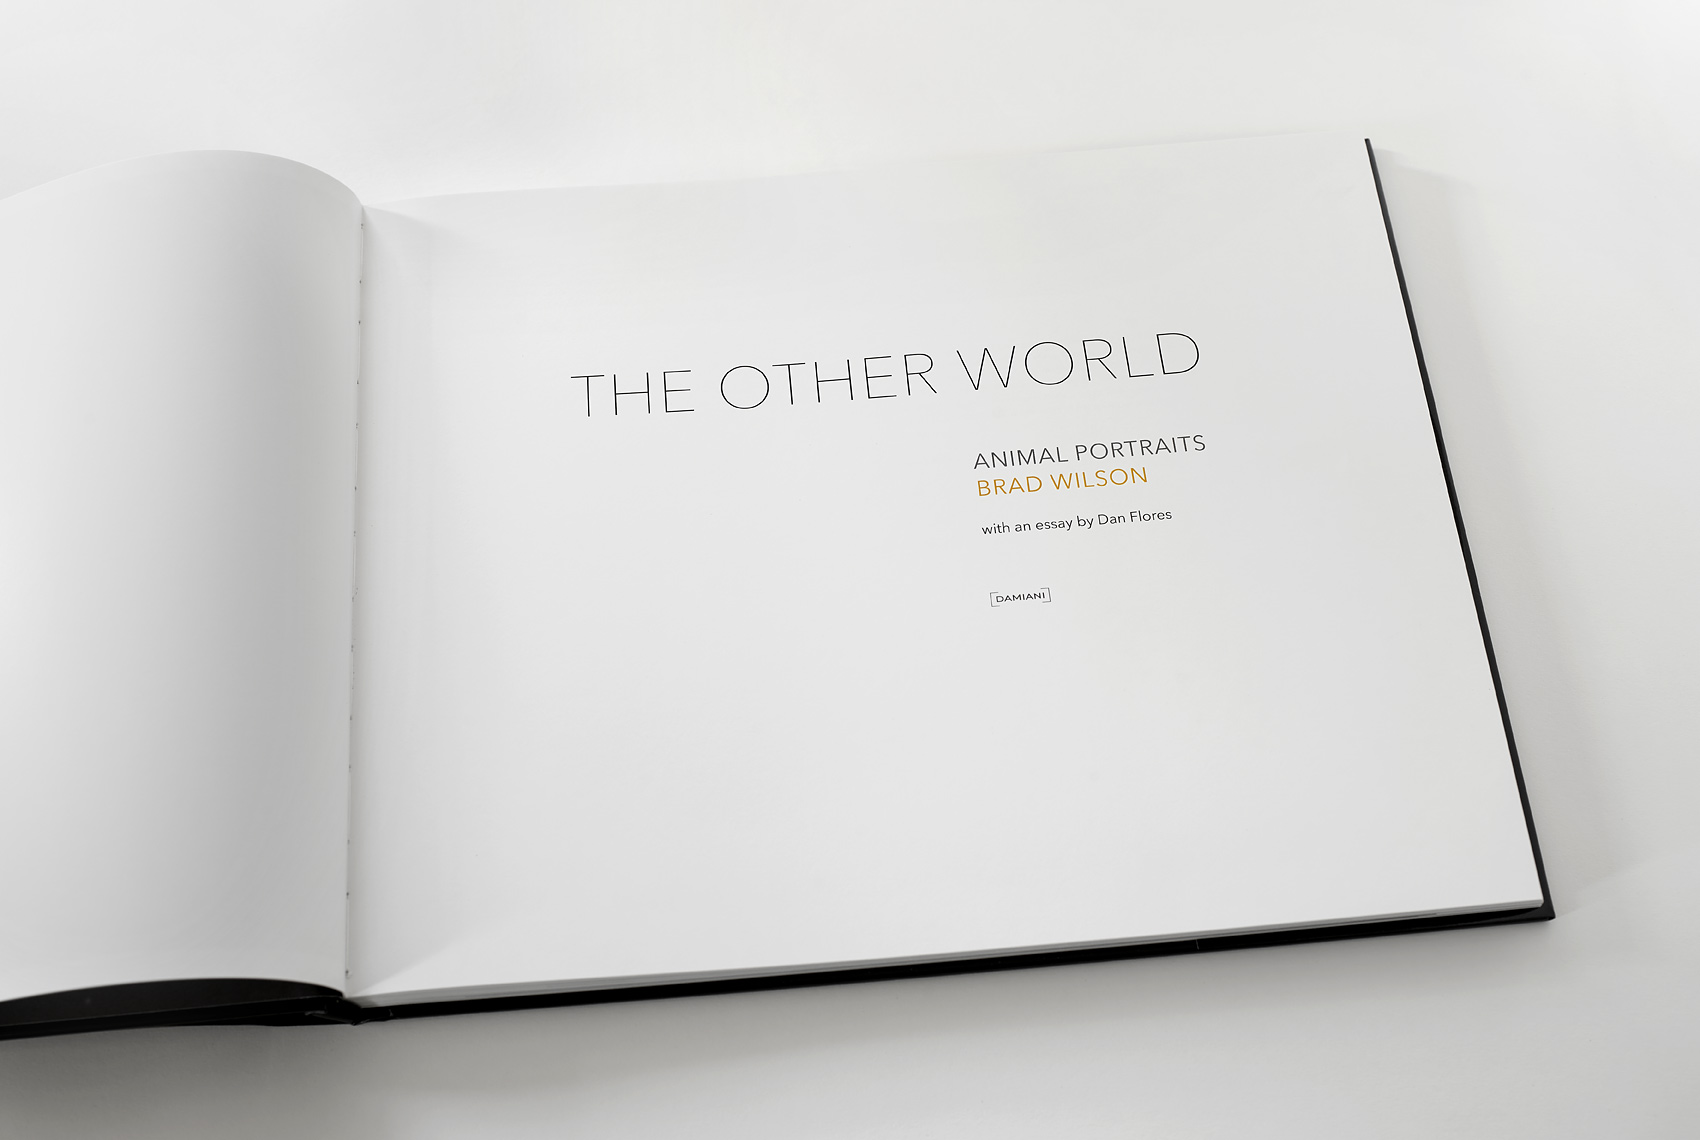 Title page of the wildlife portrait book The Other World